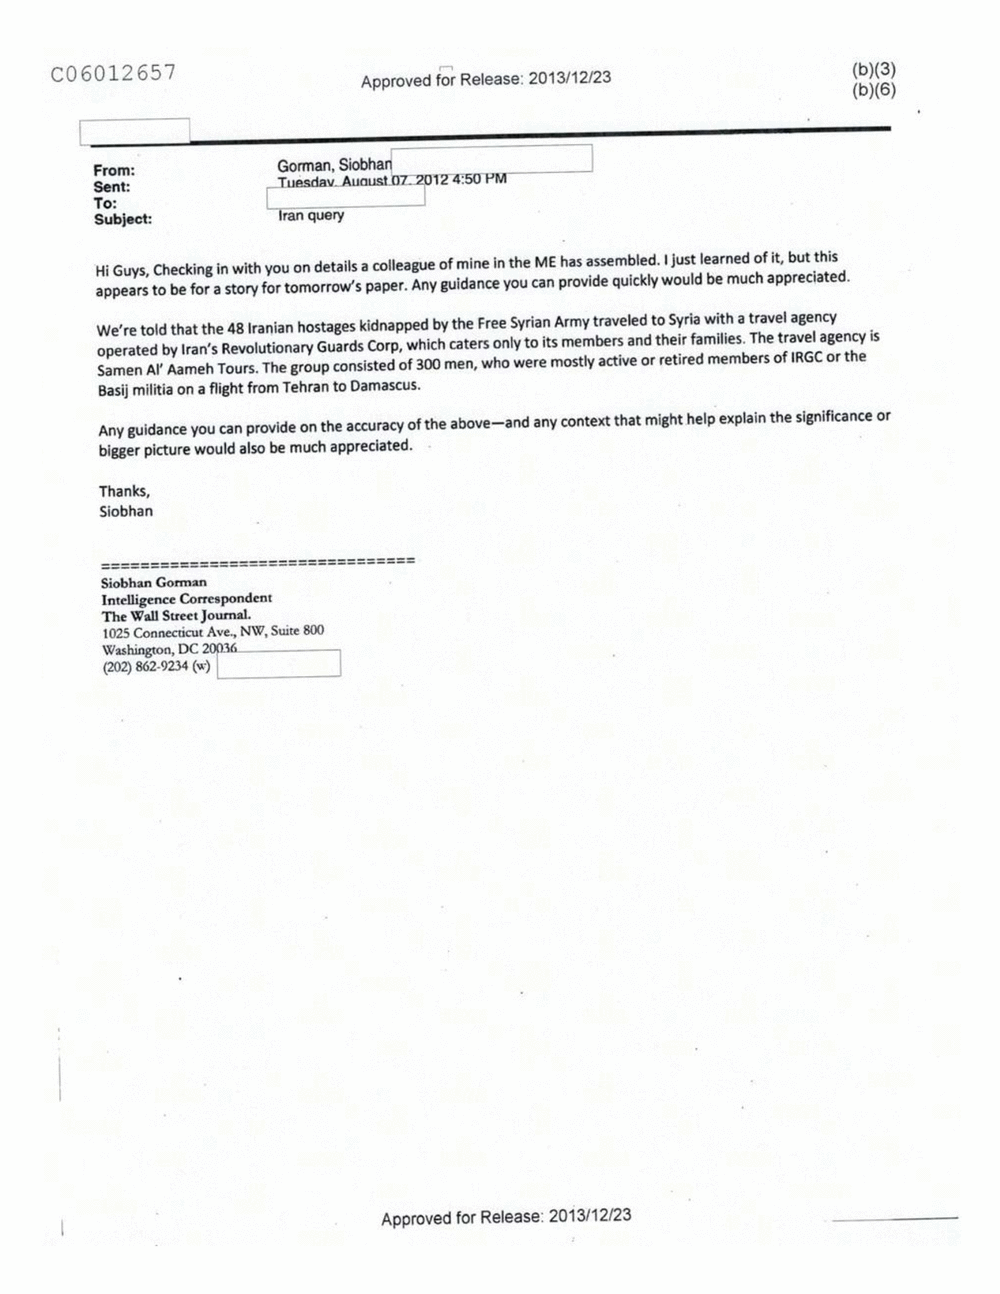 Page 234 from Email Correspondence Between Reporters and CIA Flacks